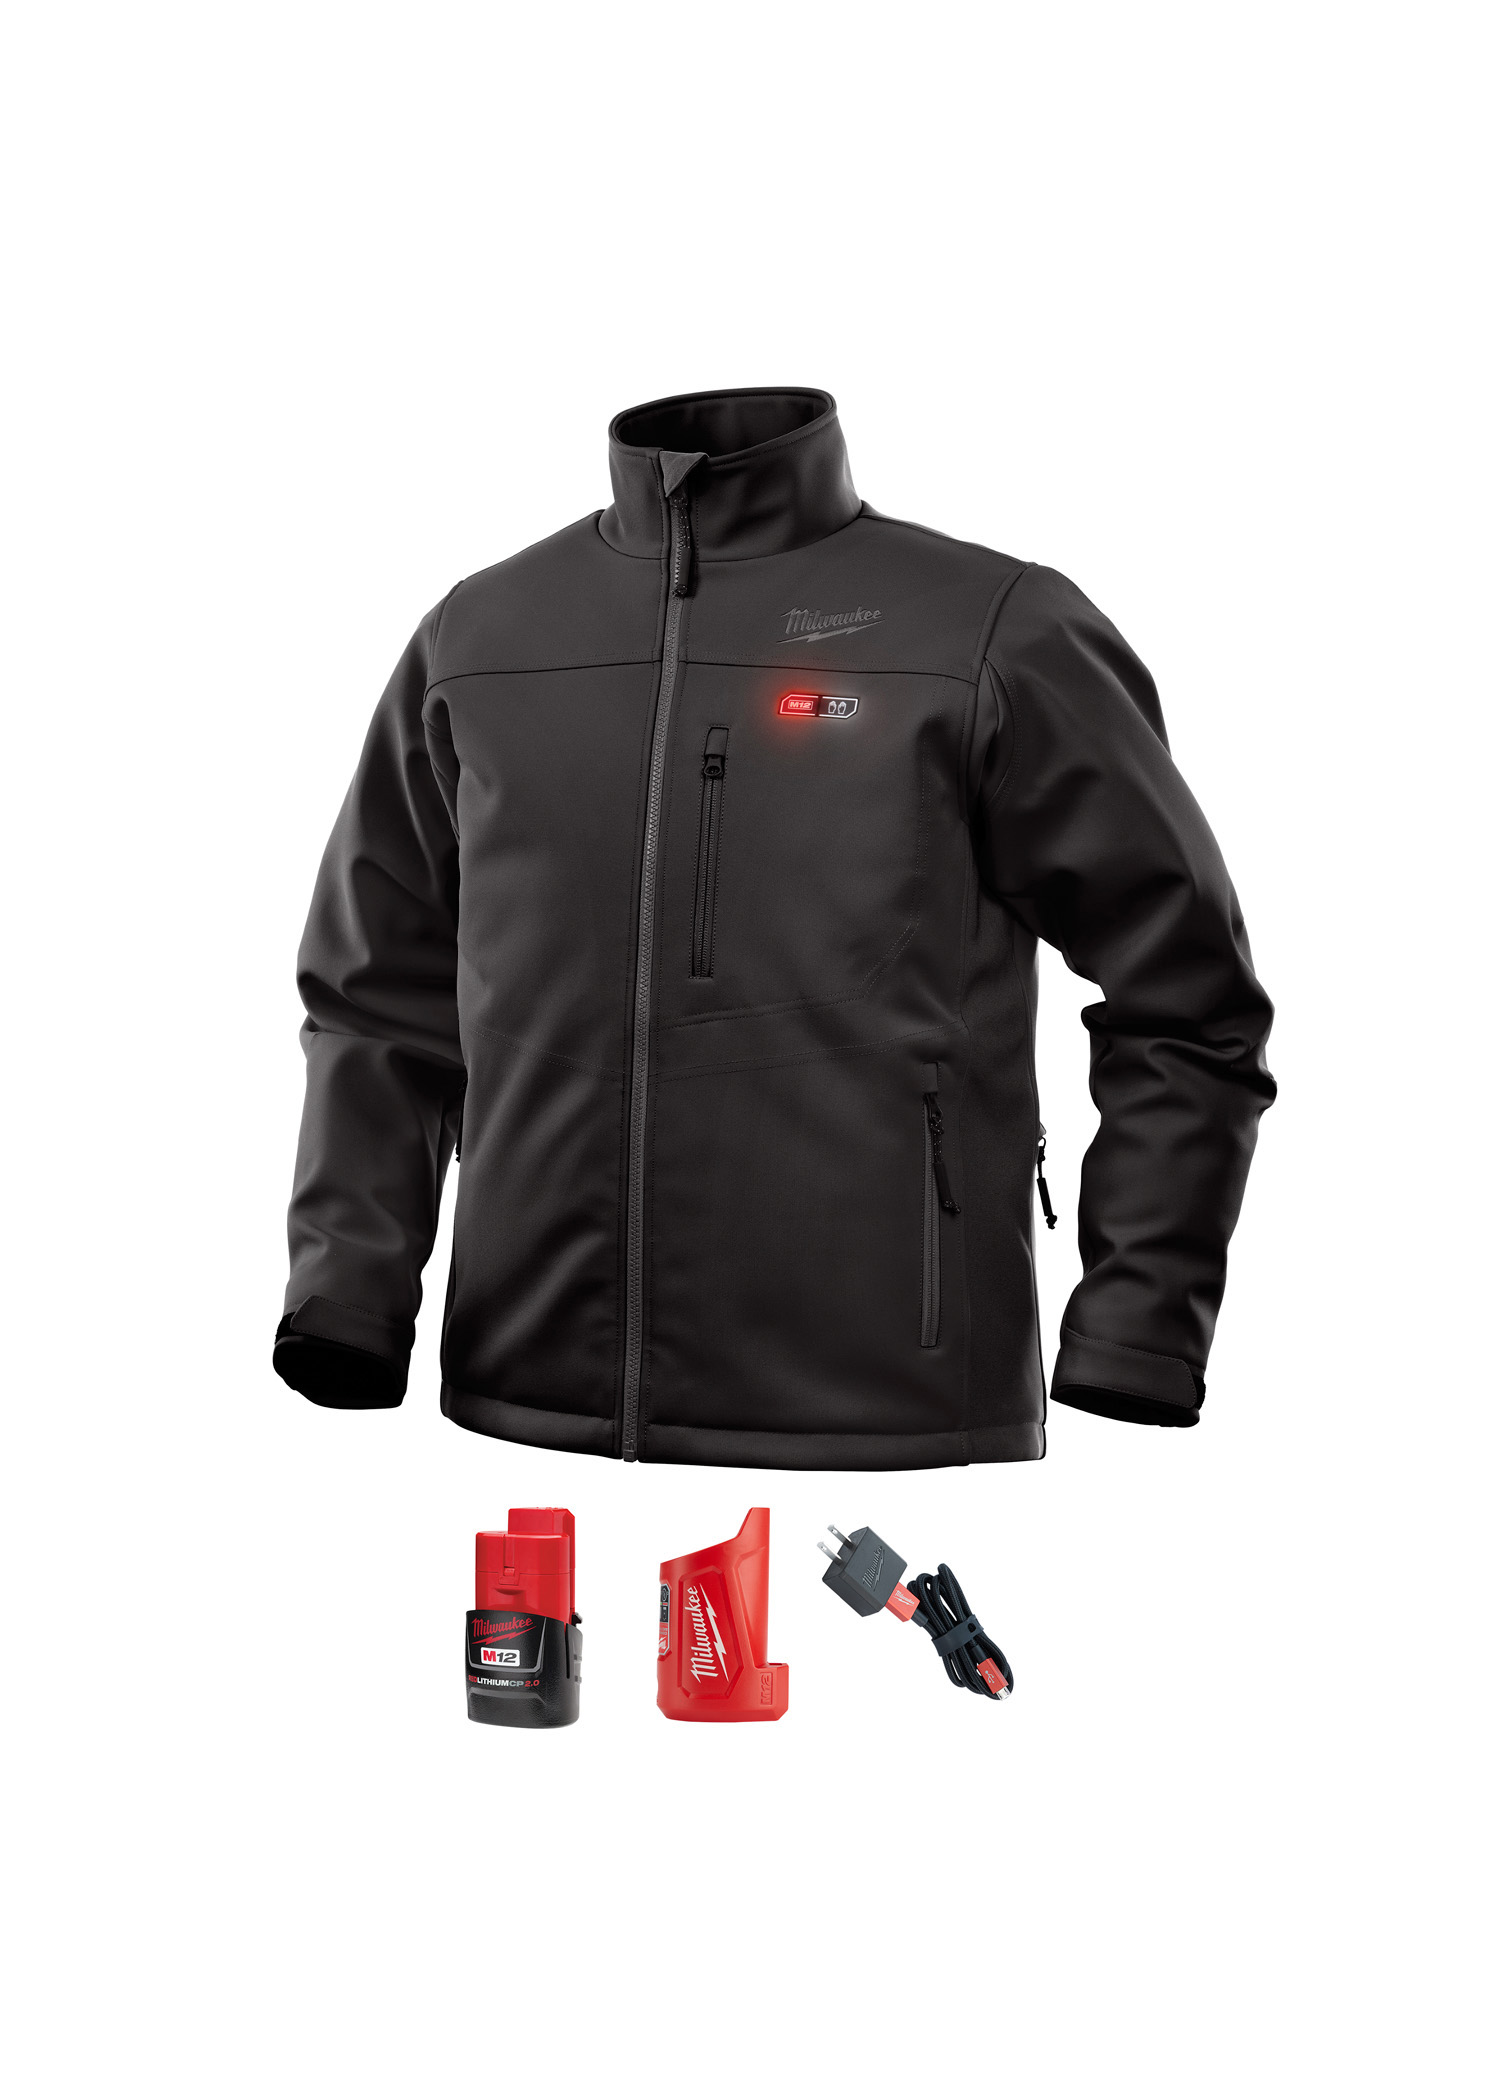 PERSONAL PROTECTIVE EQUIPMENT | Milwaukee Heated Jackets and Gloves ...